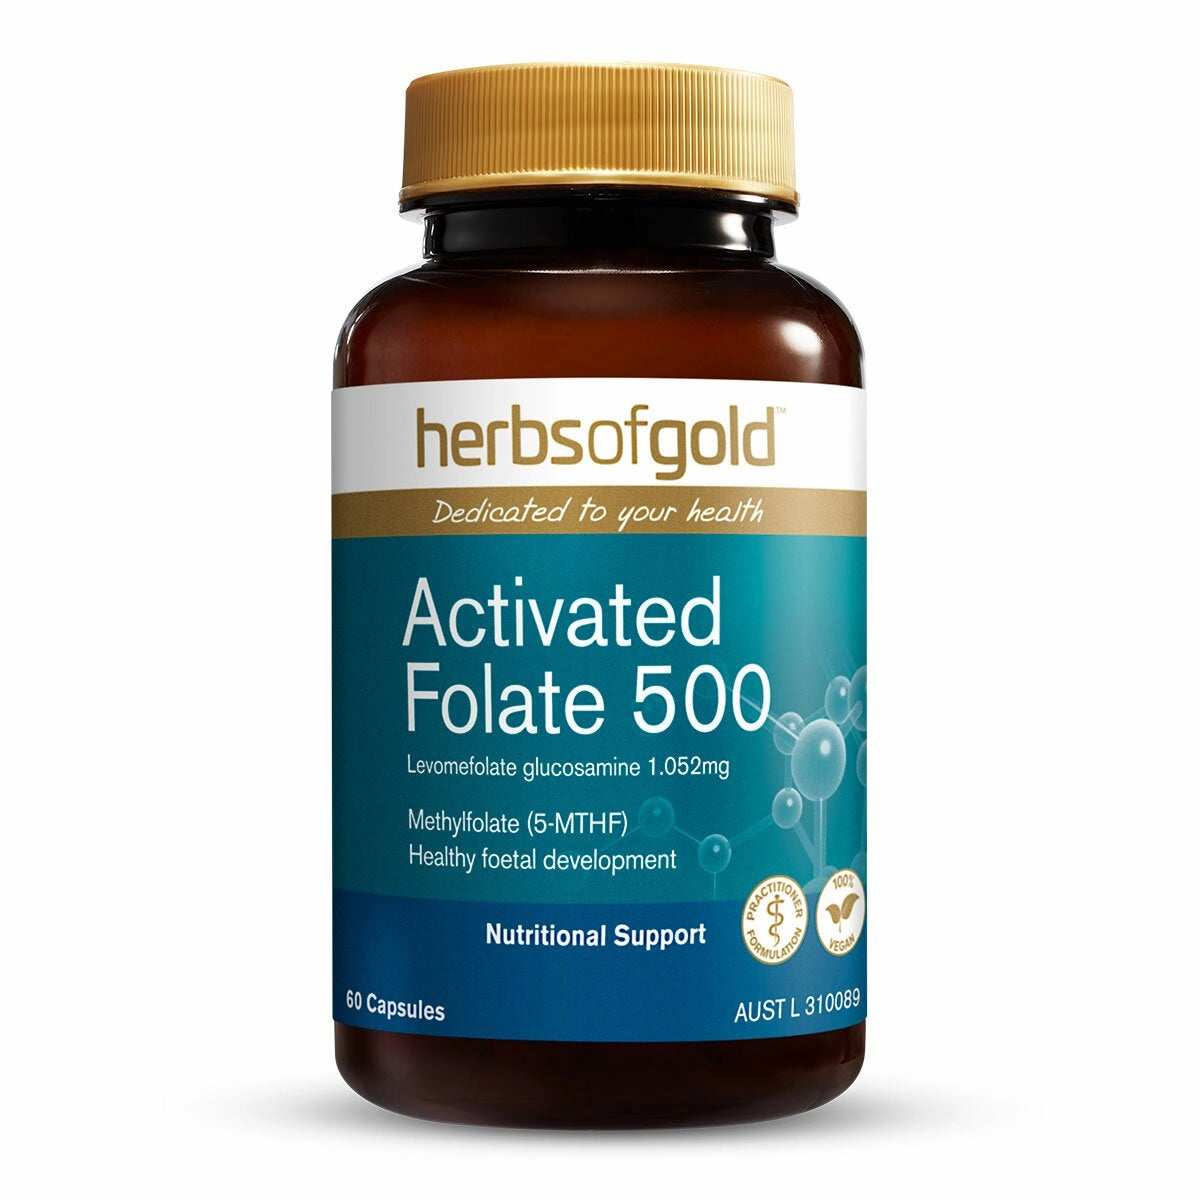 Activated Folate 500 Herbs of Gold